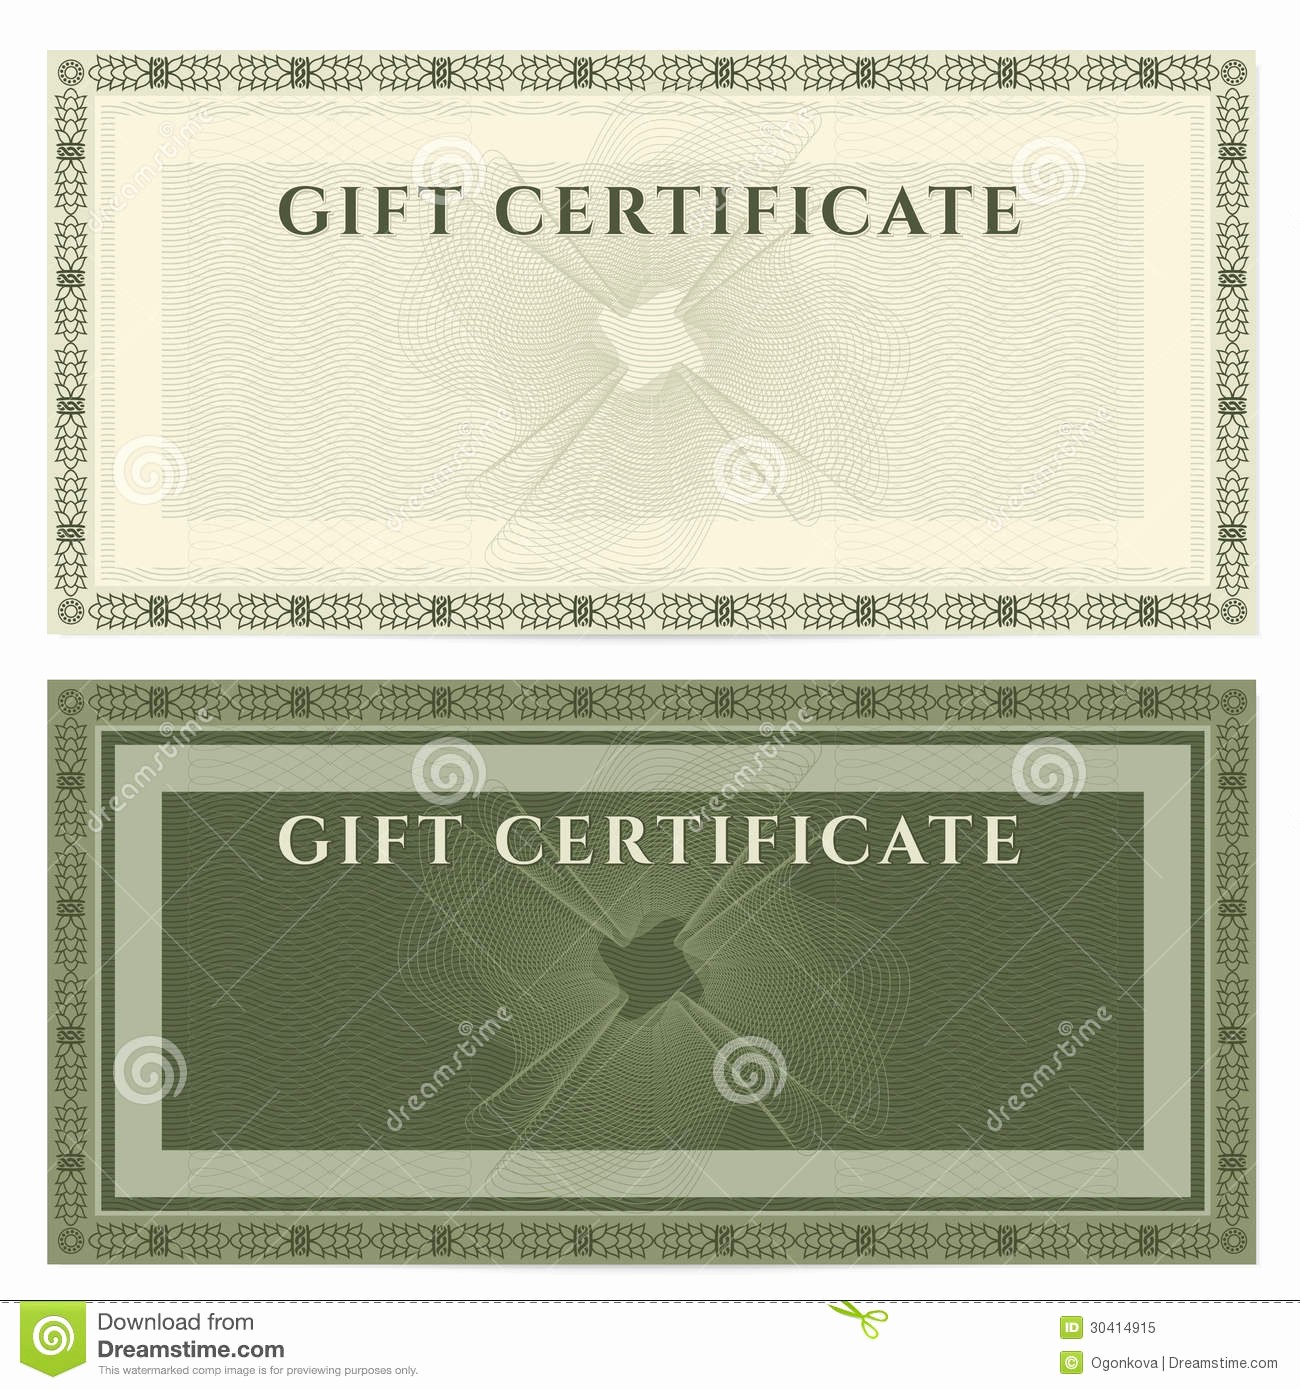 Make Gift Certificate Online Free Best Of Vintage Voucher Coupon Template with Border Royalty Free